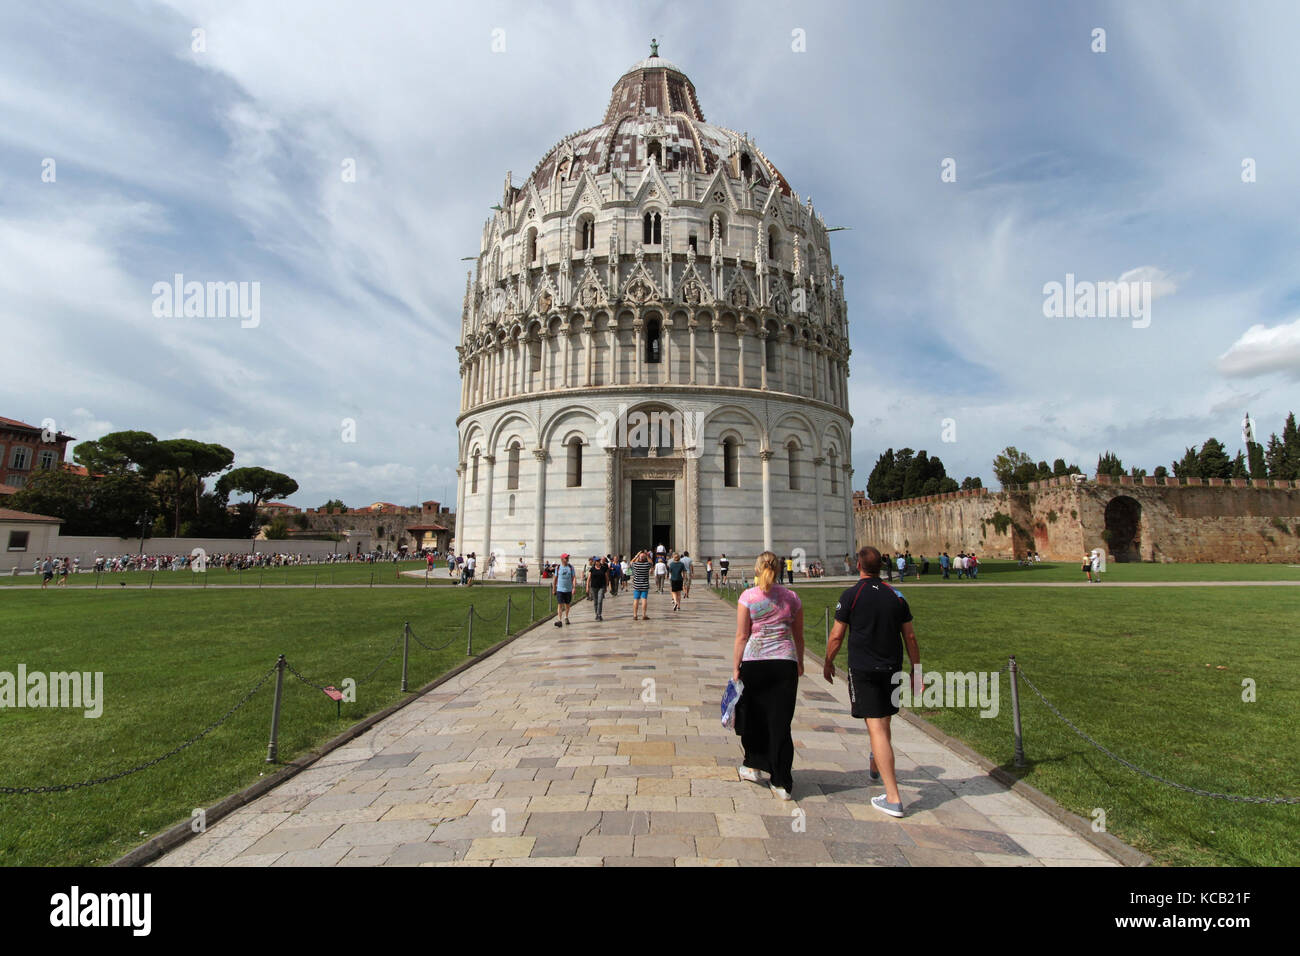 PISA, ITALY, September 15, 2015 : Pisa Baptistry of St. John on Piazza dei Miracoli. Piazza del Duomo is a wide walled area located in Pisa, Stock Photo